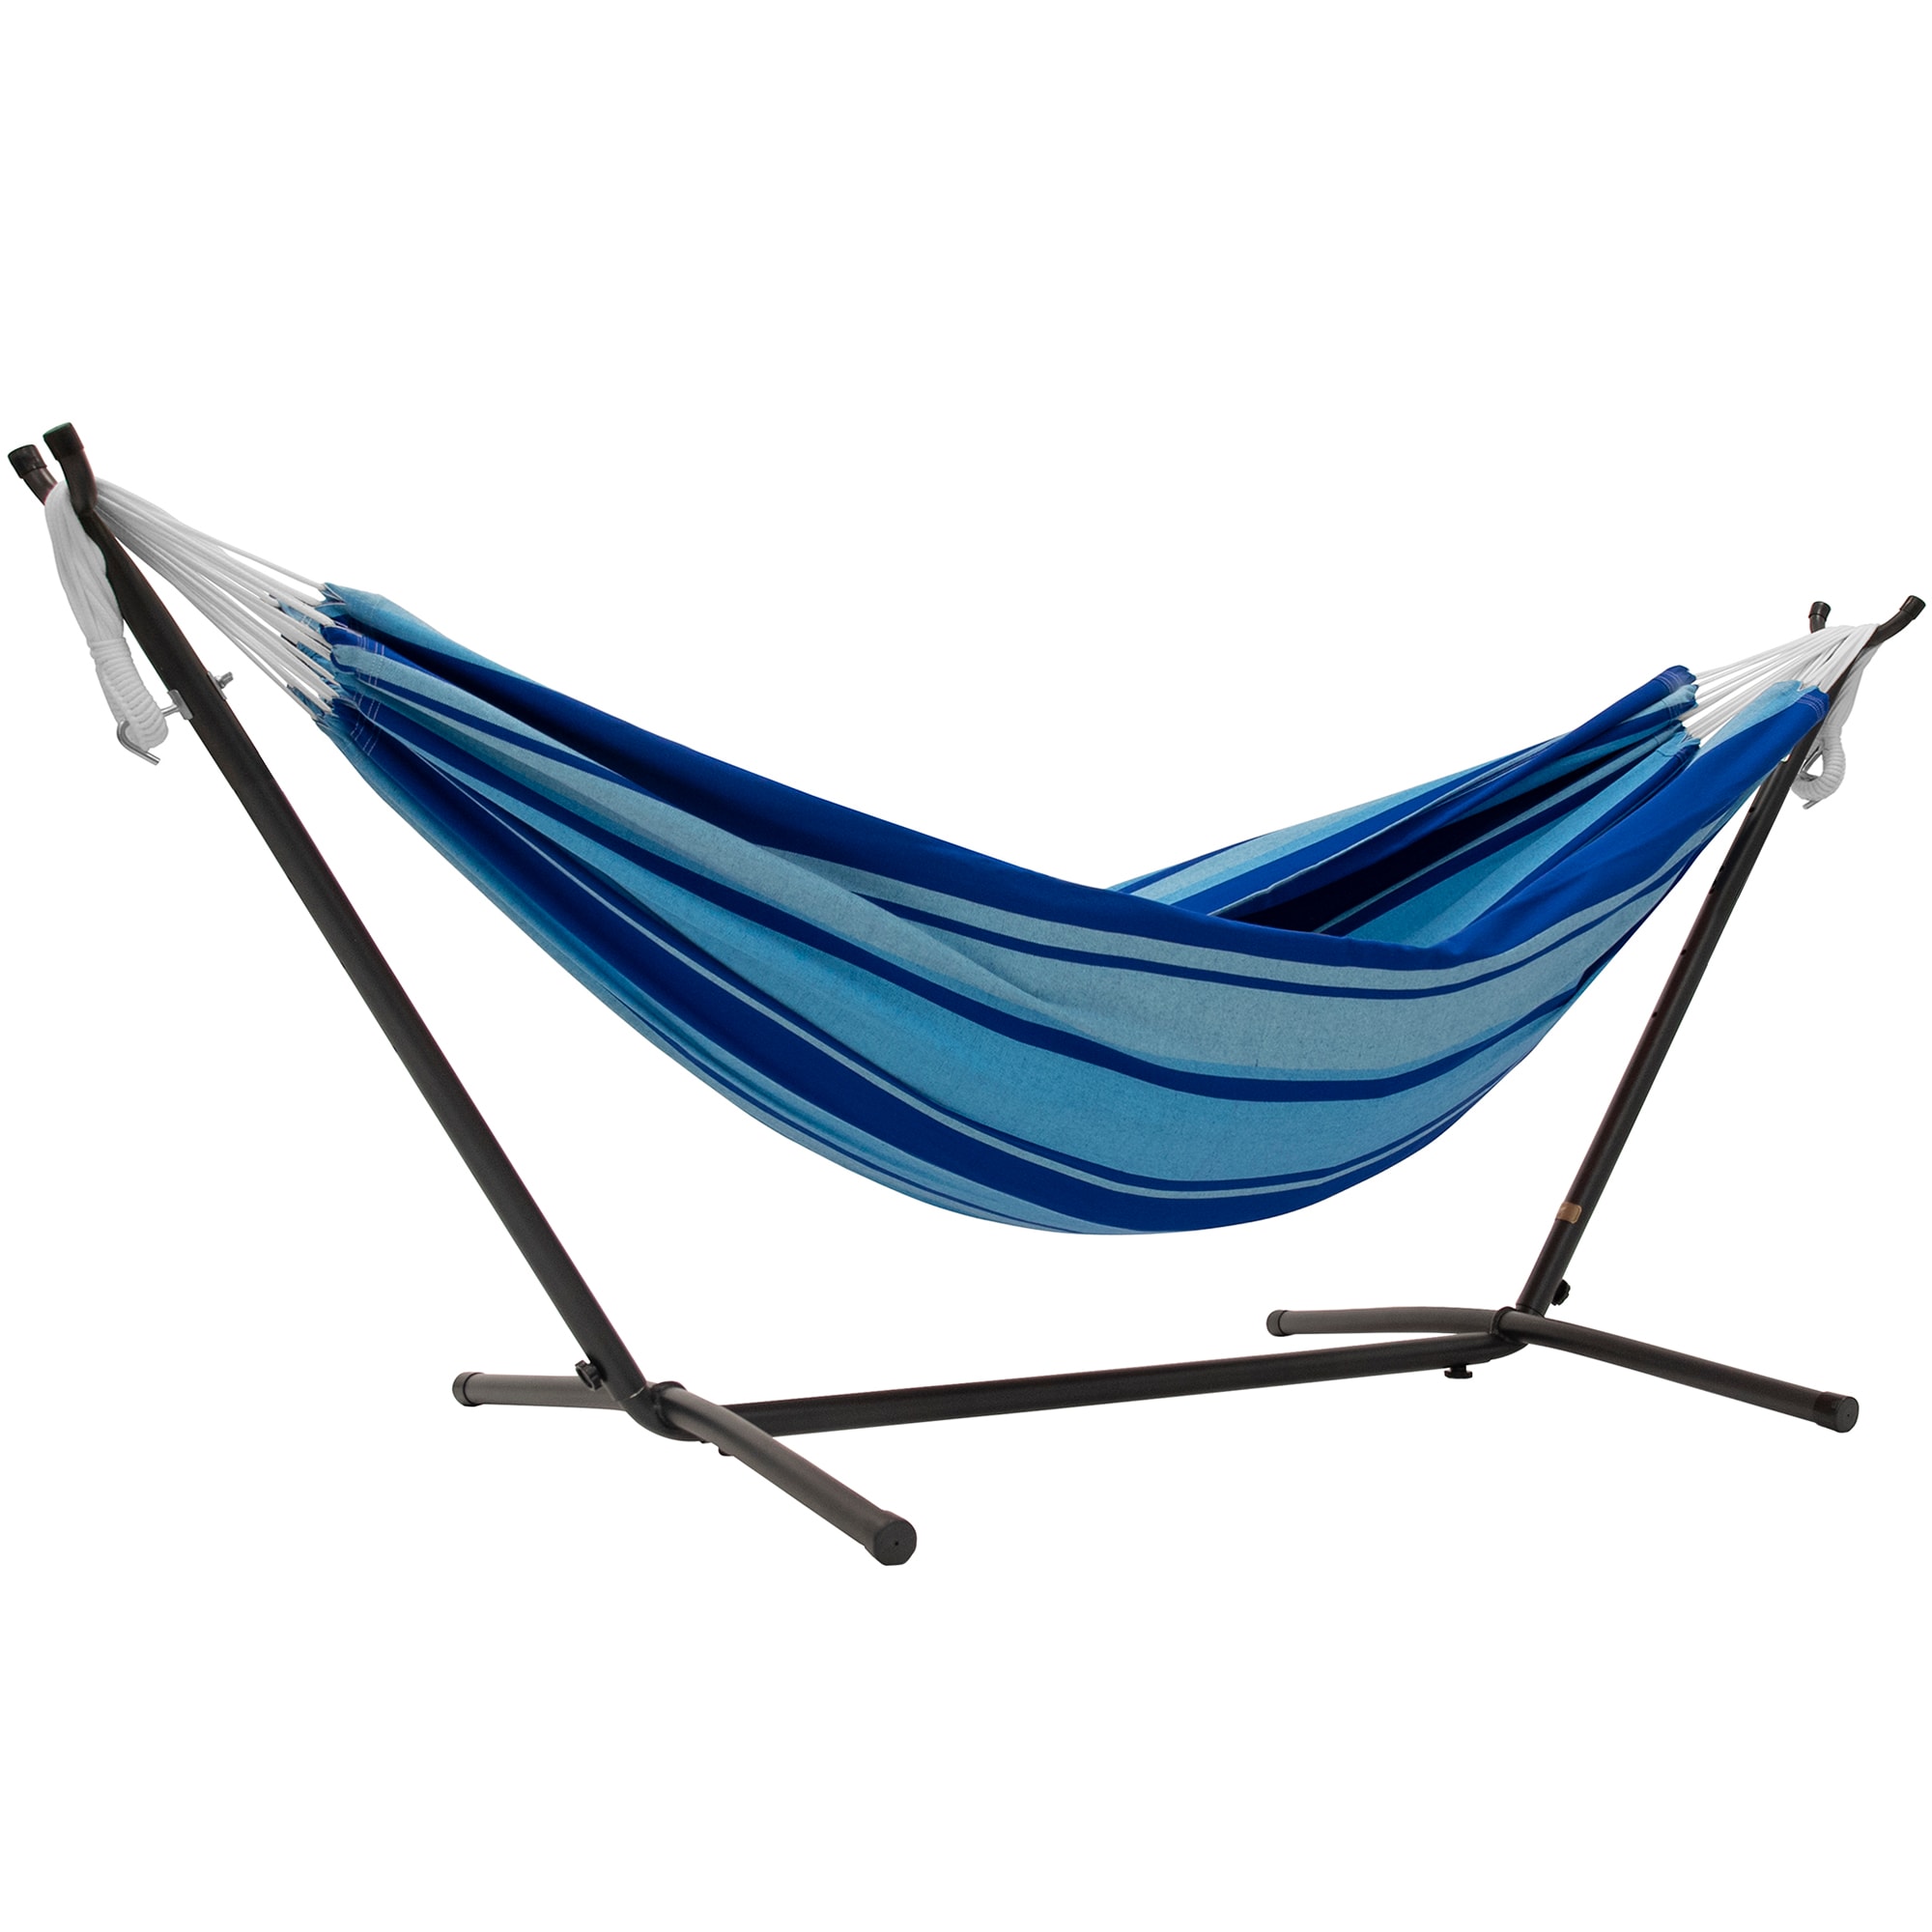 Vivere Fabric Hammock with Stand